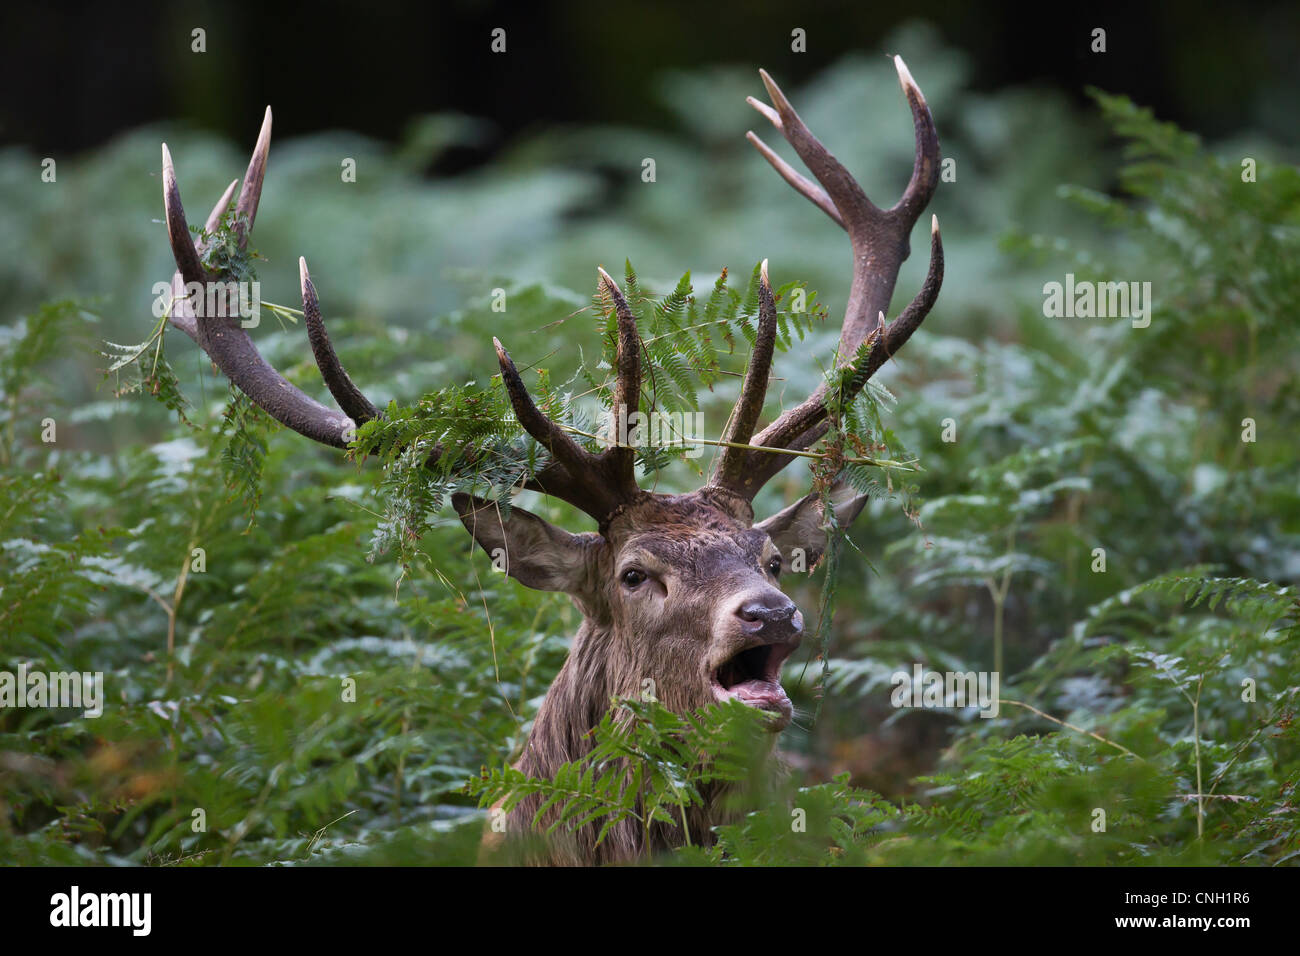 A red deer stag prepares to rut by charging through undergrowth and gathering ferns in its horns Stock Photo